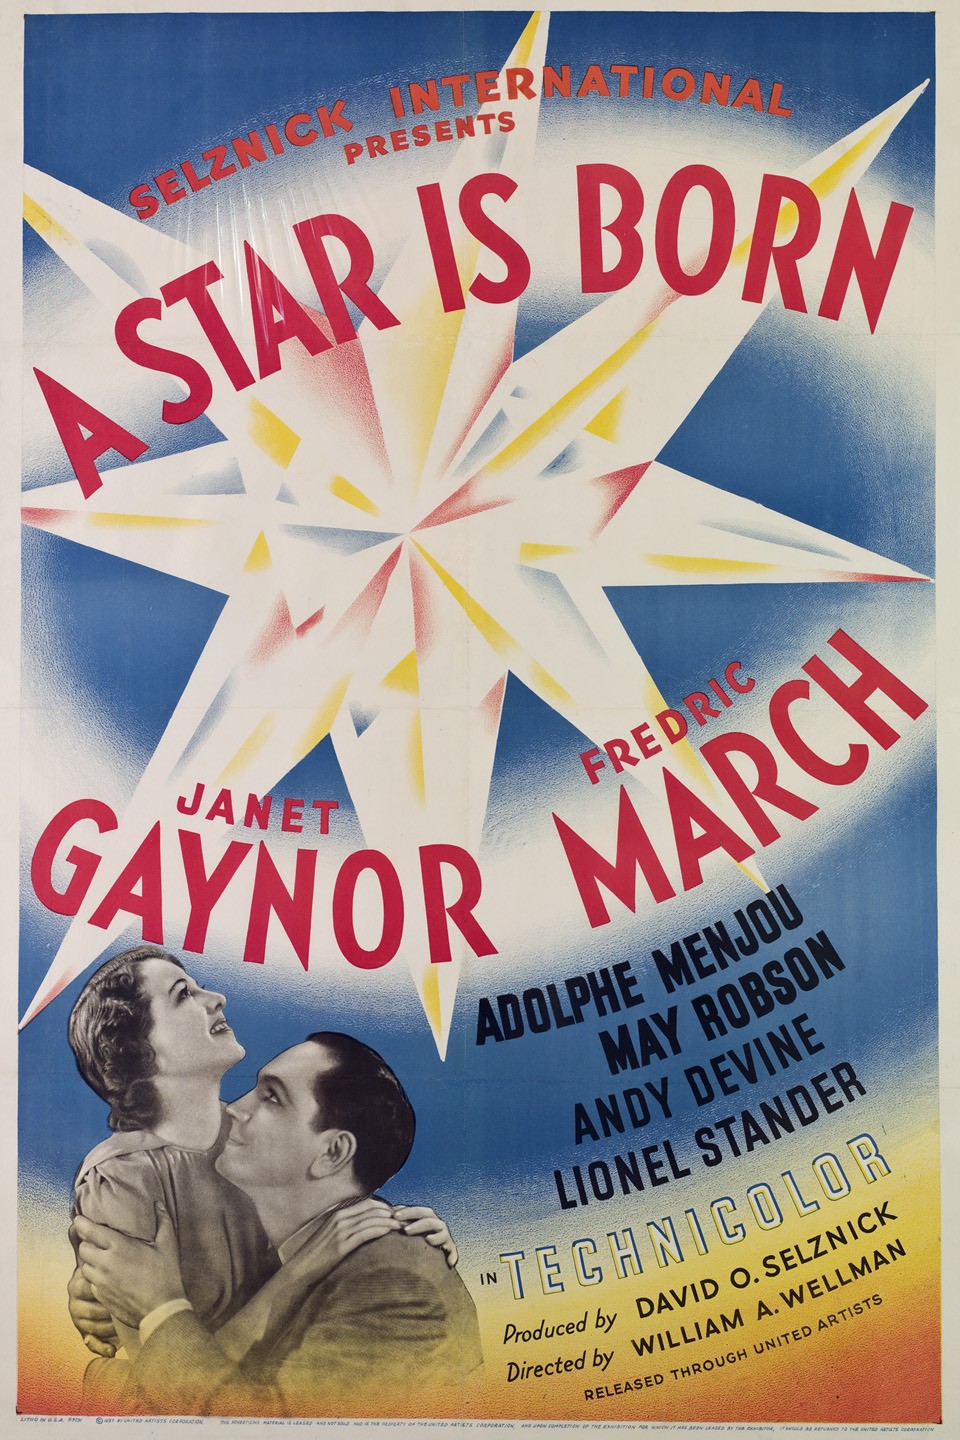 A STAR IS BORN [1937]